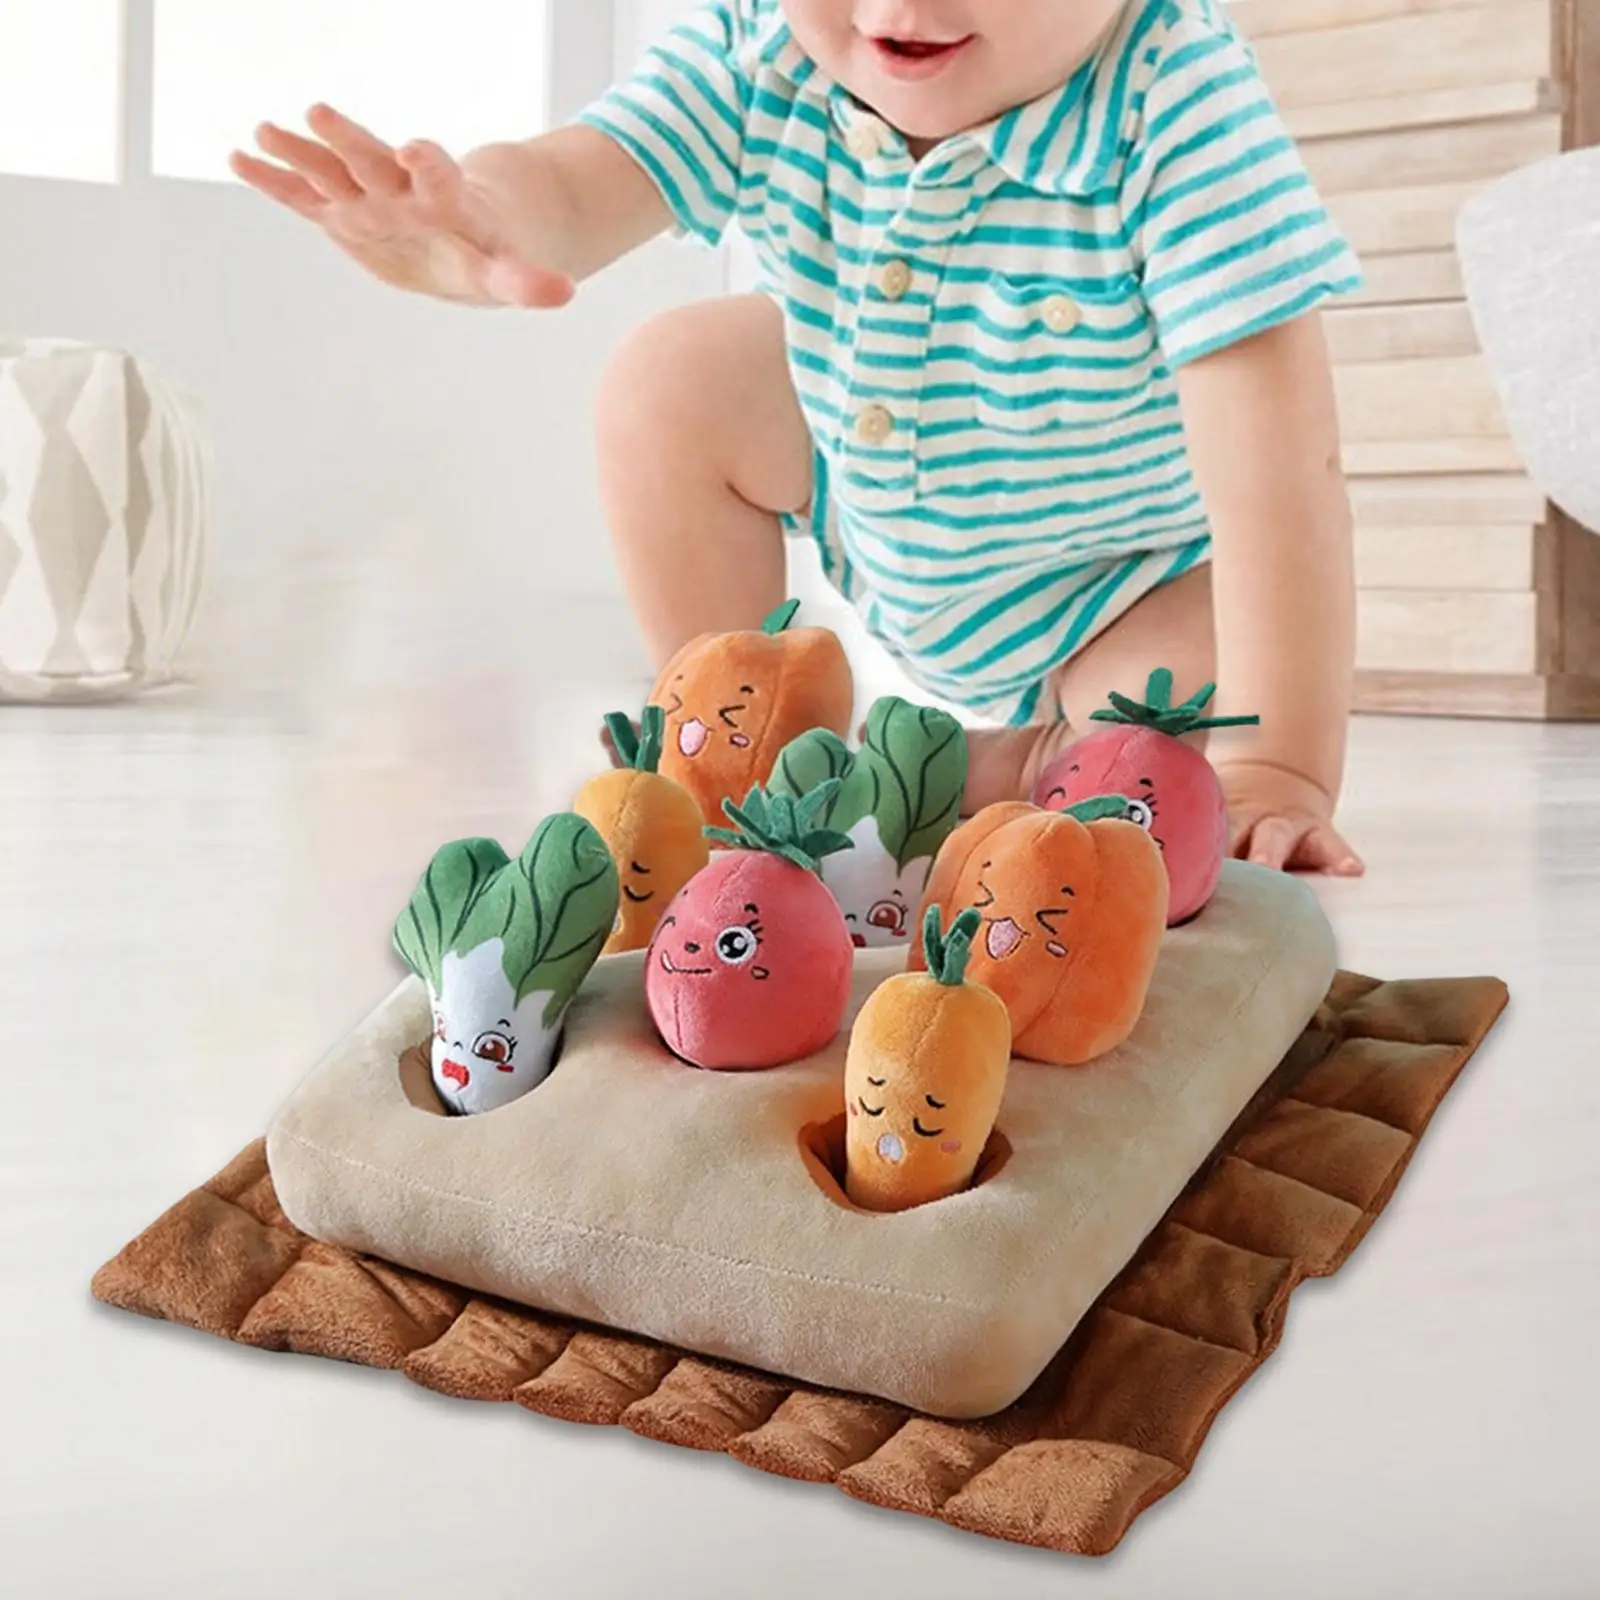 Toddlers Montessori Toys Vegetable Plush Toy for Developing Hand Eye Cooperation Accessories Colorful Measure 14.6x13.8inch